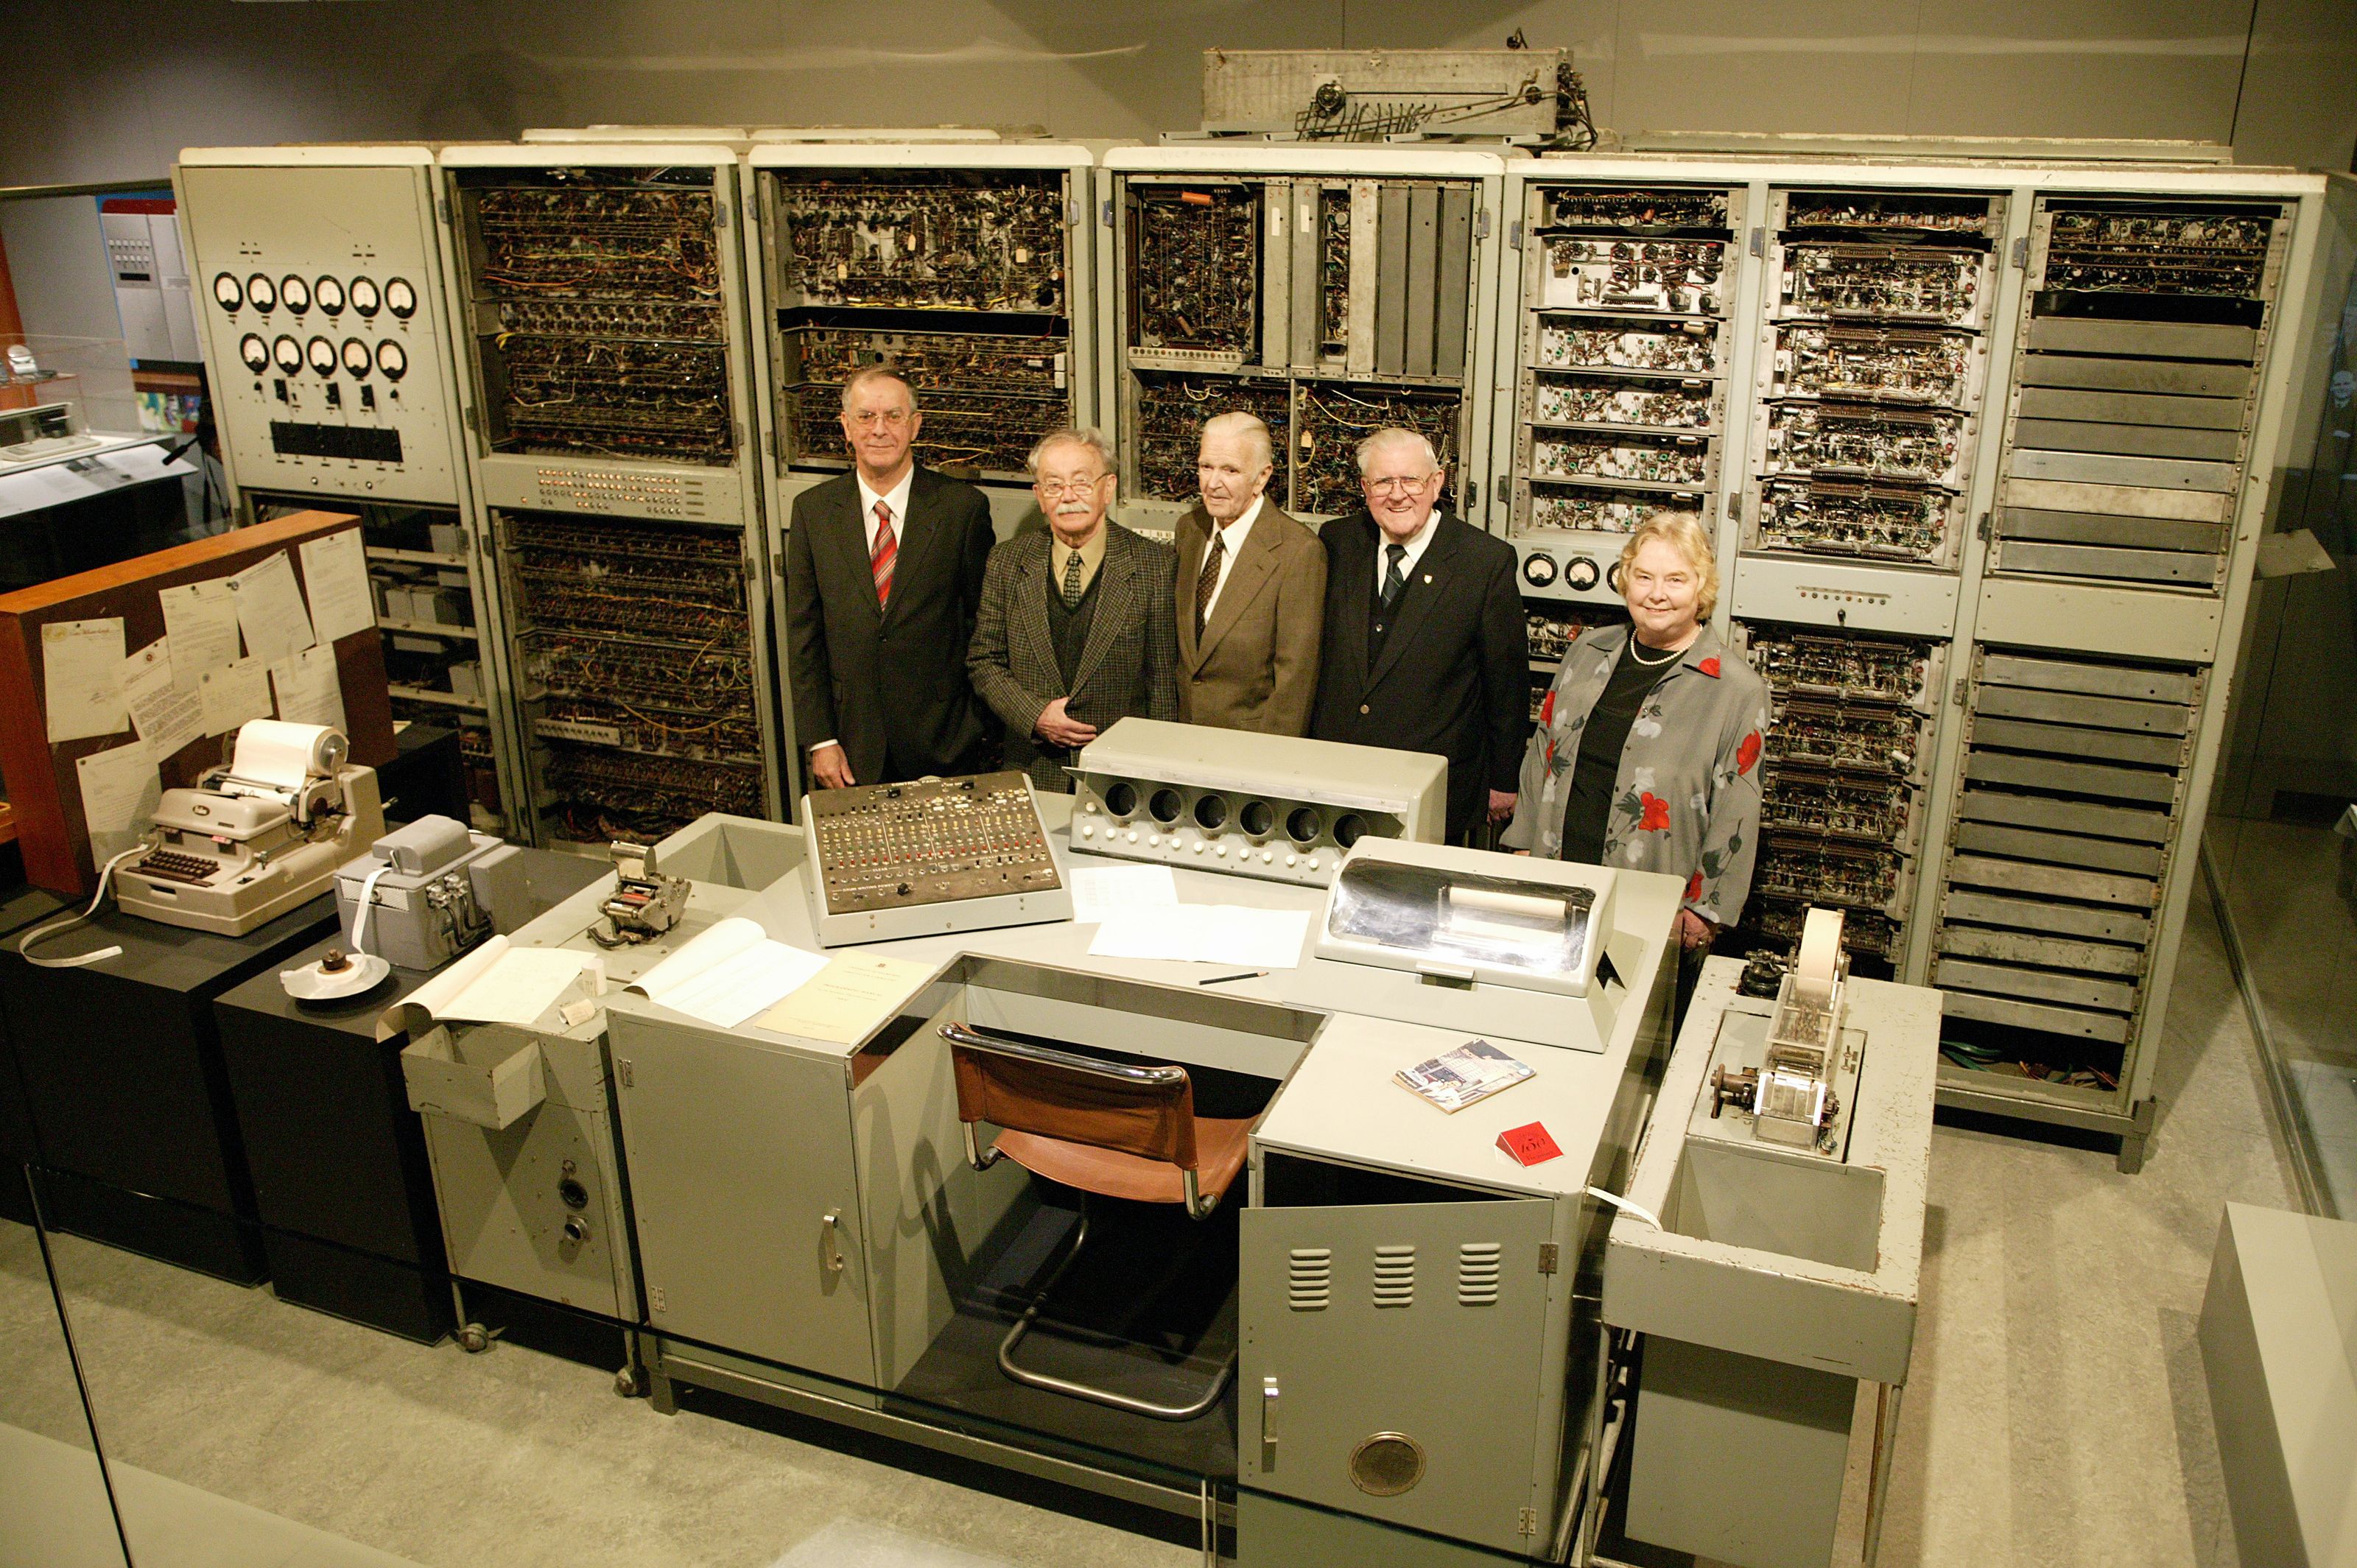 The restored colossus CSIRAC with some of the engineers who worked on it